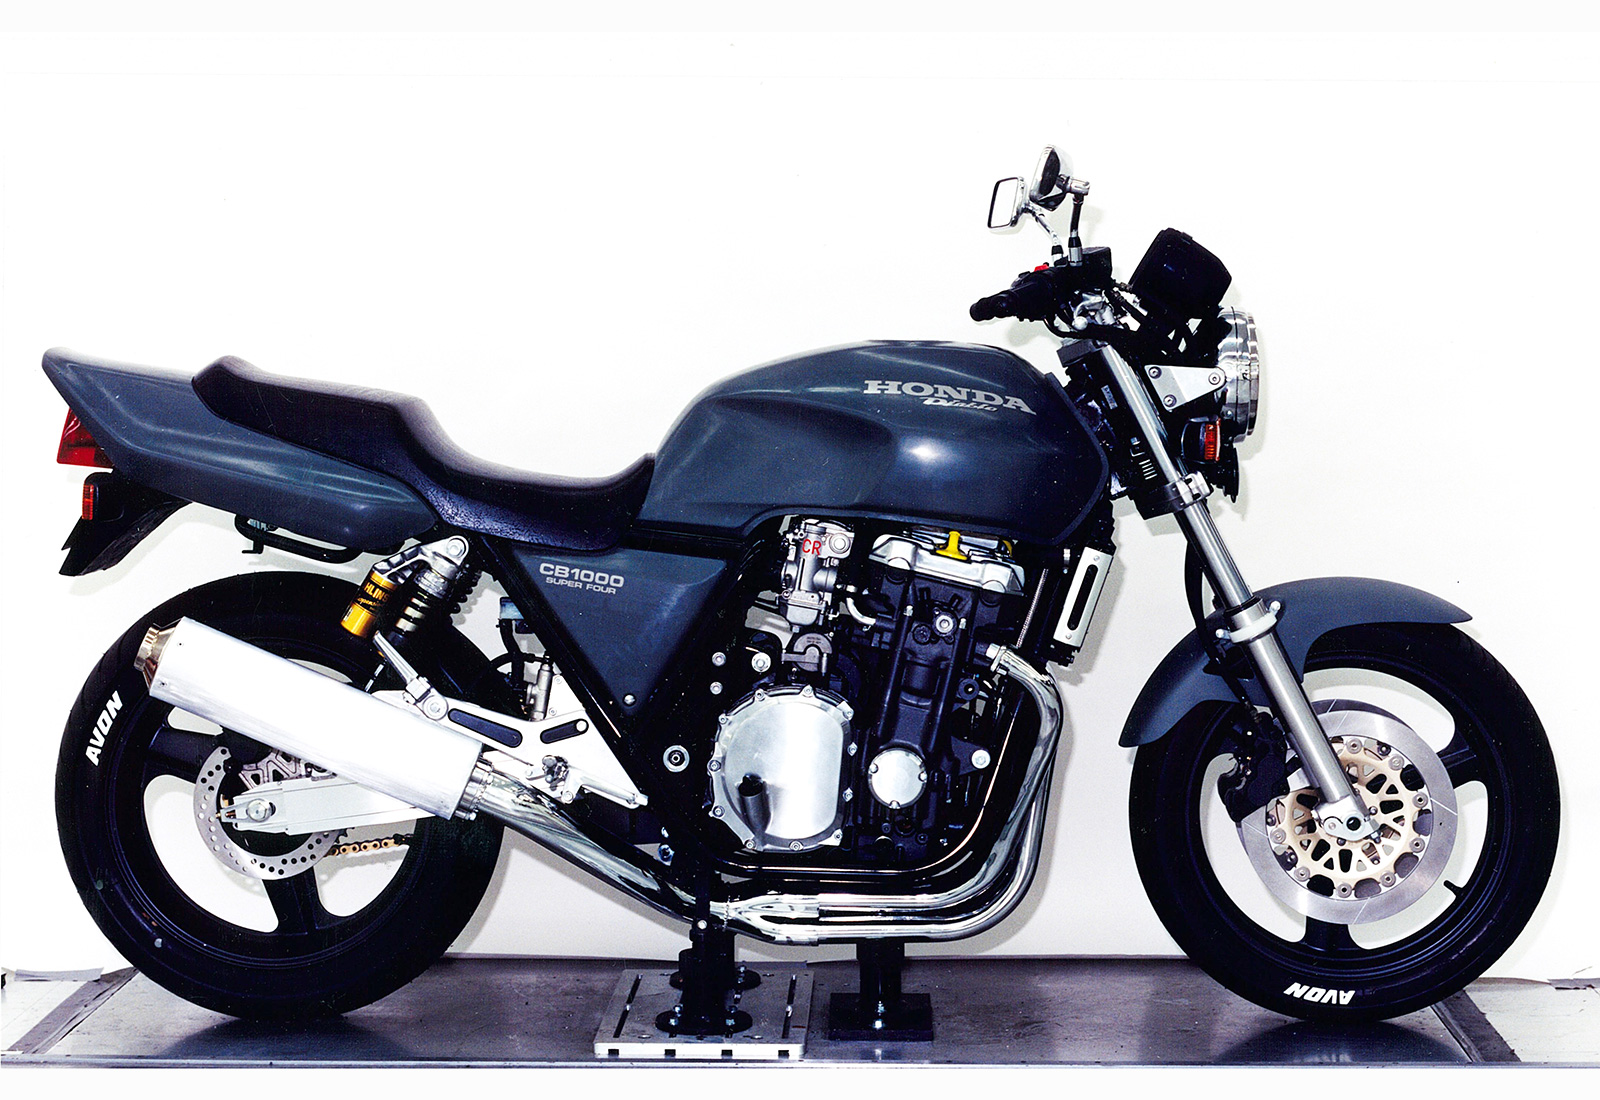 CB1000 SUPER FOUR image clay model produced with design precedence